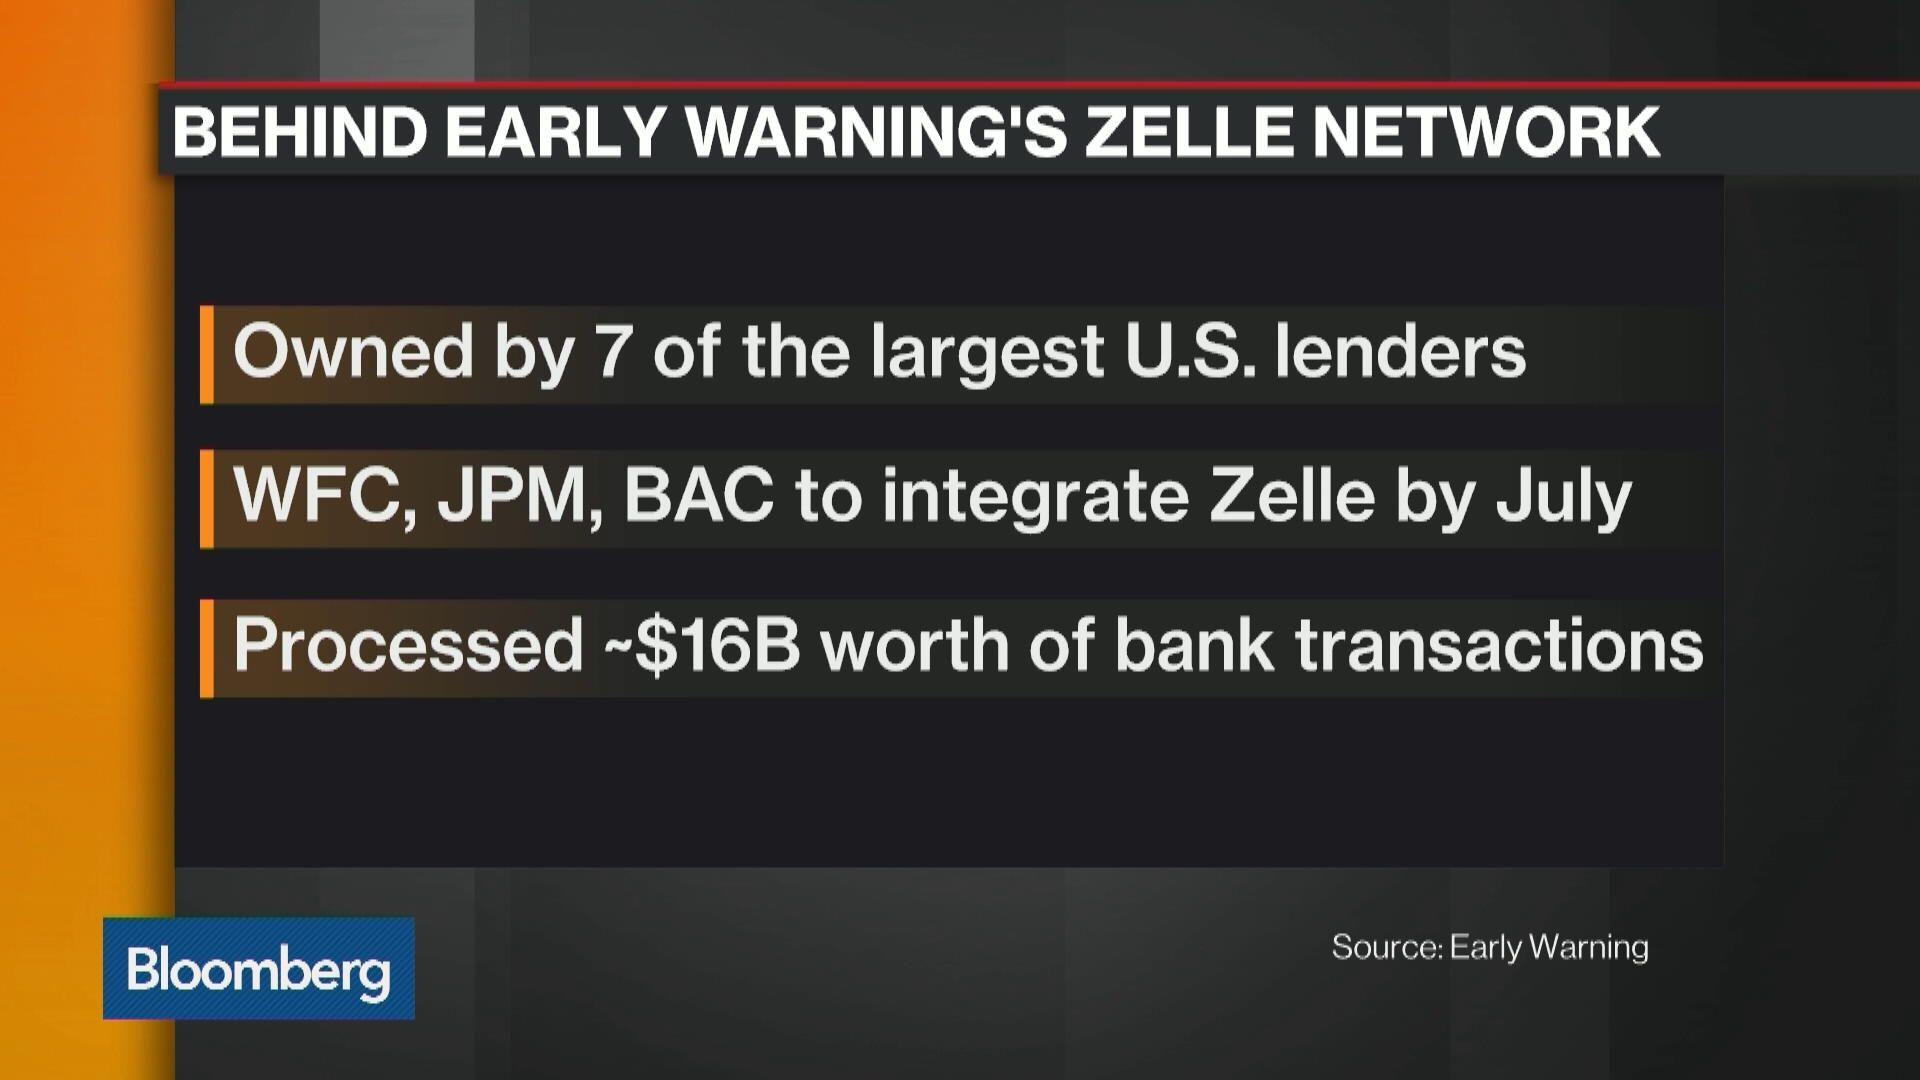 Zell Early Warning Logo - Why Early Warning's Zelle Network Could Be a Venmo Killer